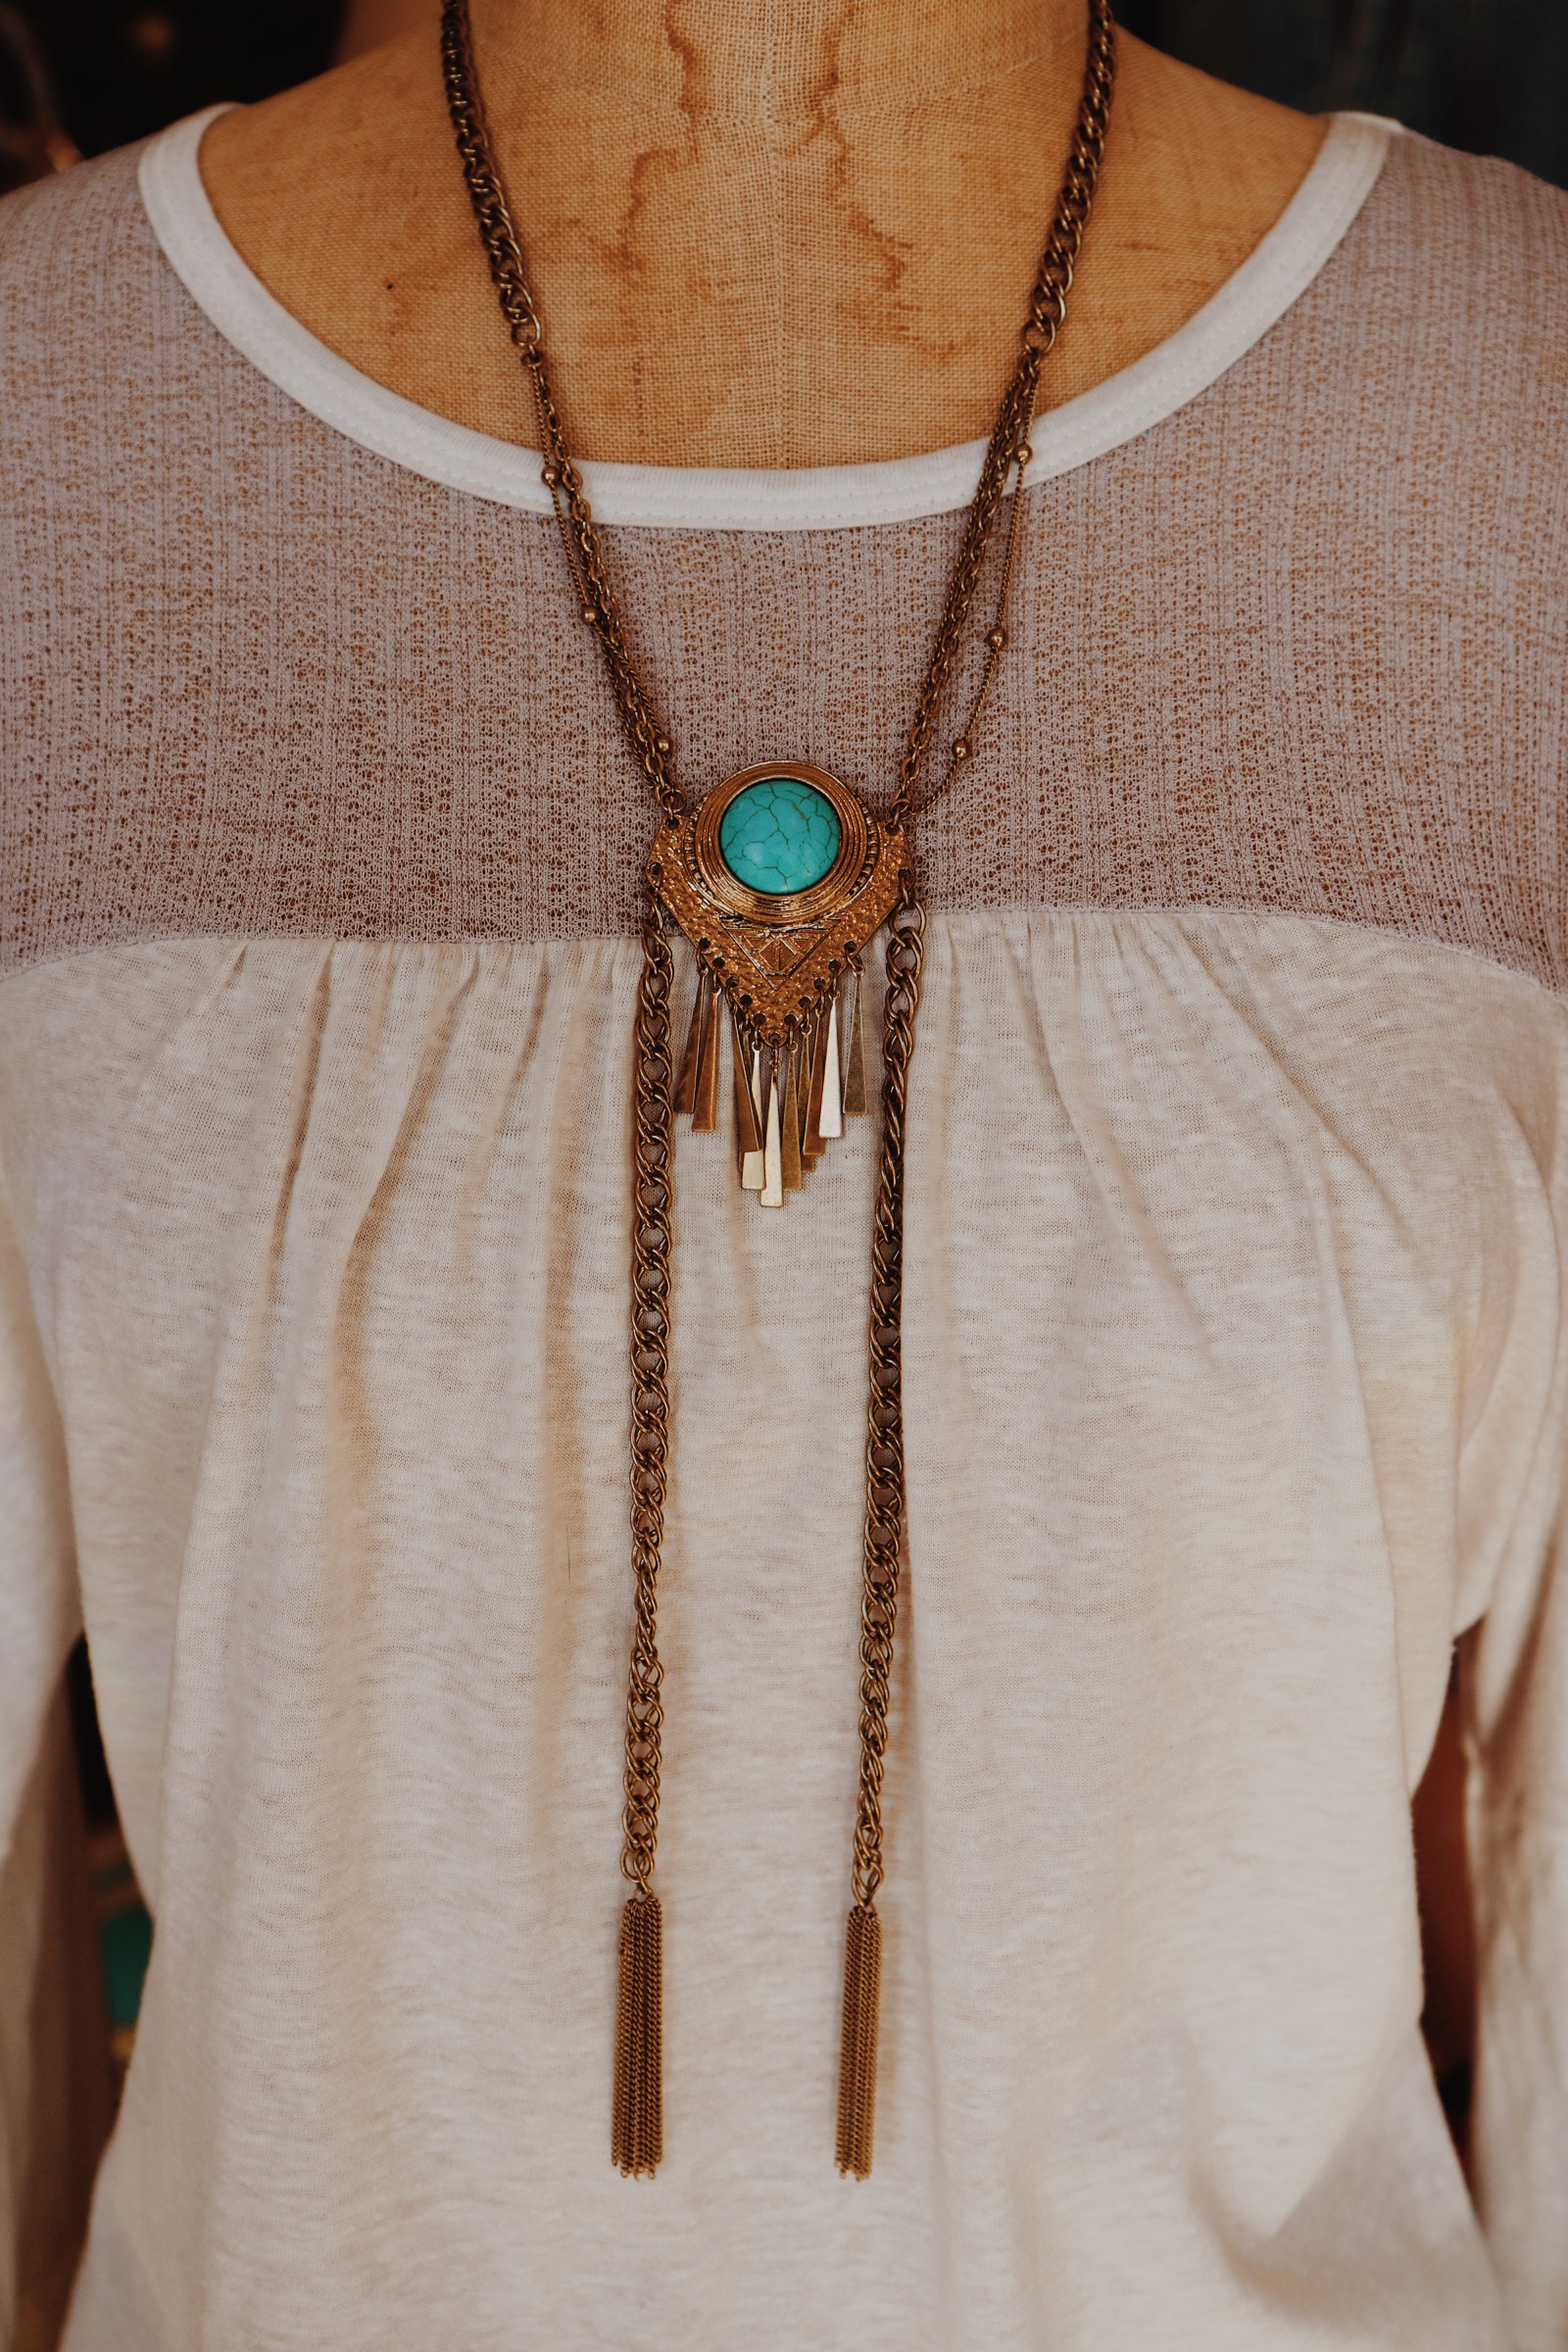 This unique beauty is the perfect gold colored piece! It is on a 21 inch chain with a 3 inch extender and has 9 inch tassel chains hanging from the turquoise pendant!